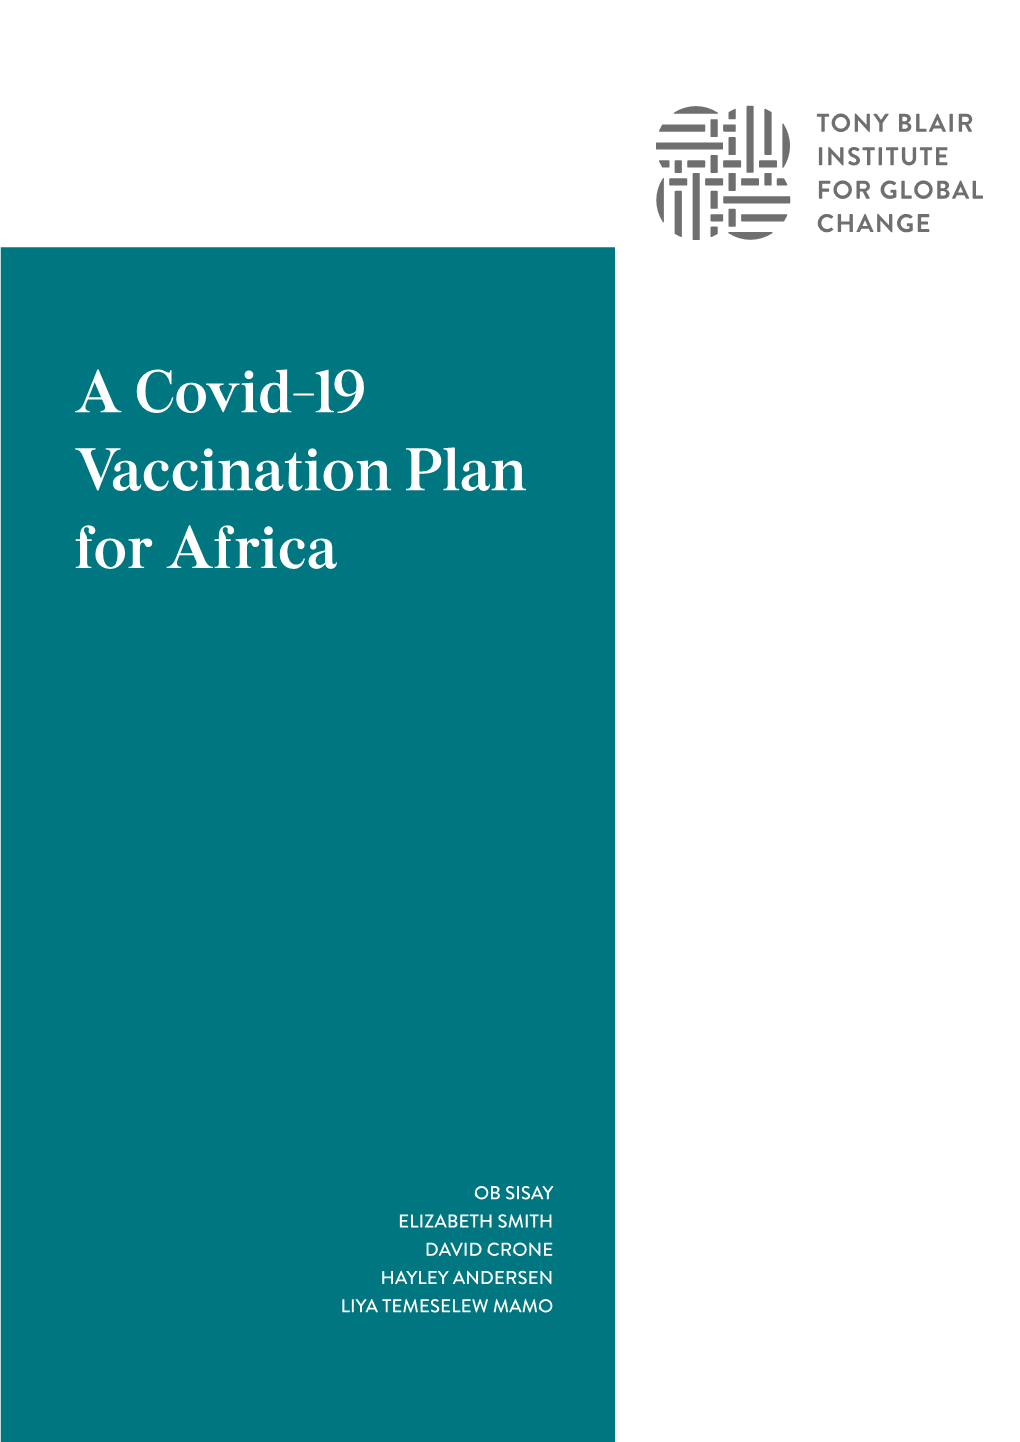 A Covid-19 Vaccination Plan for Africa | Institute for Global Change